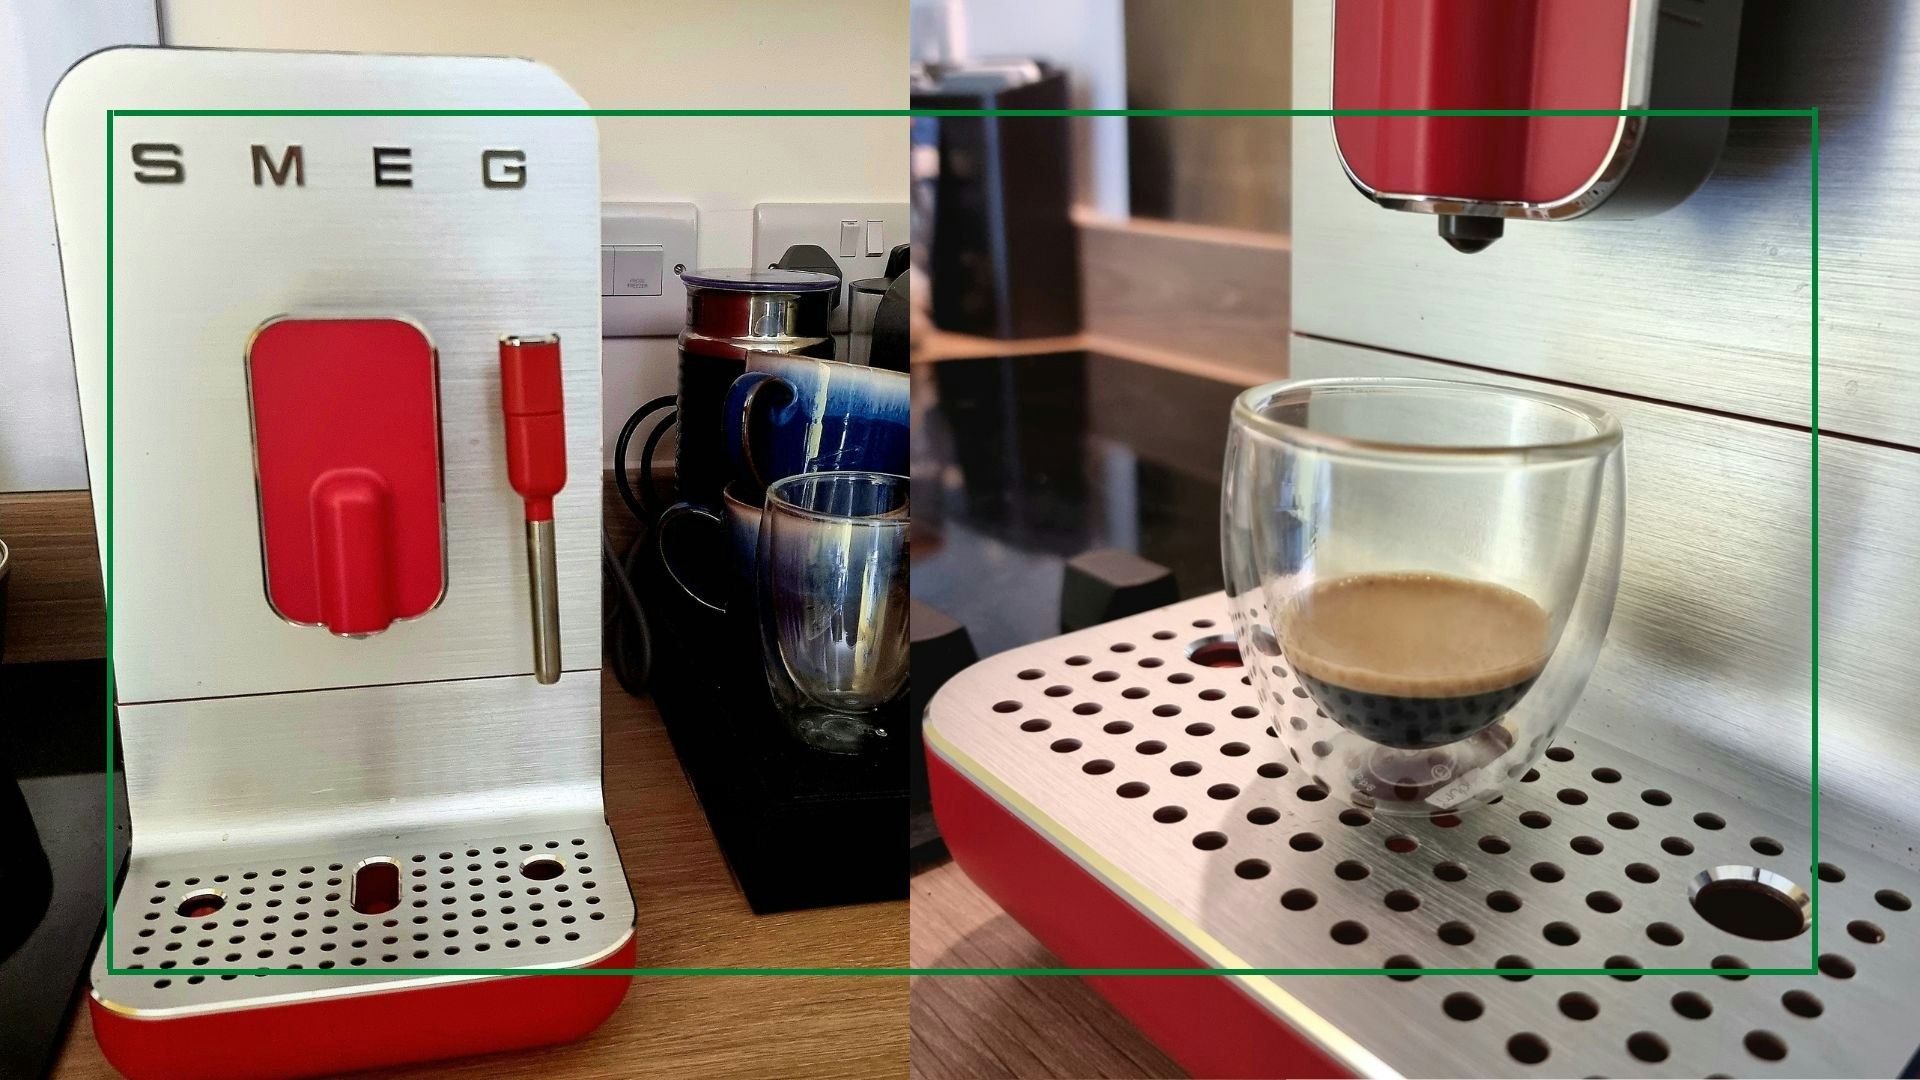 Smeg BCC02 Automatic Coffee Machine With Milk Frother - Crema